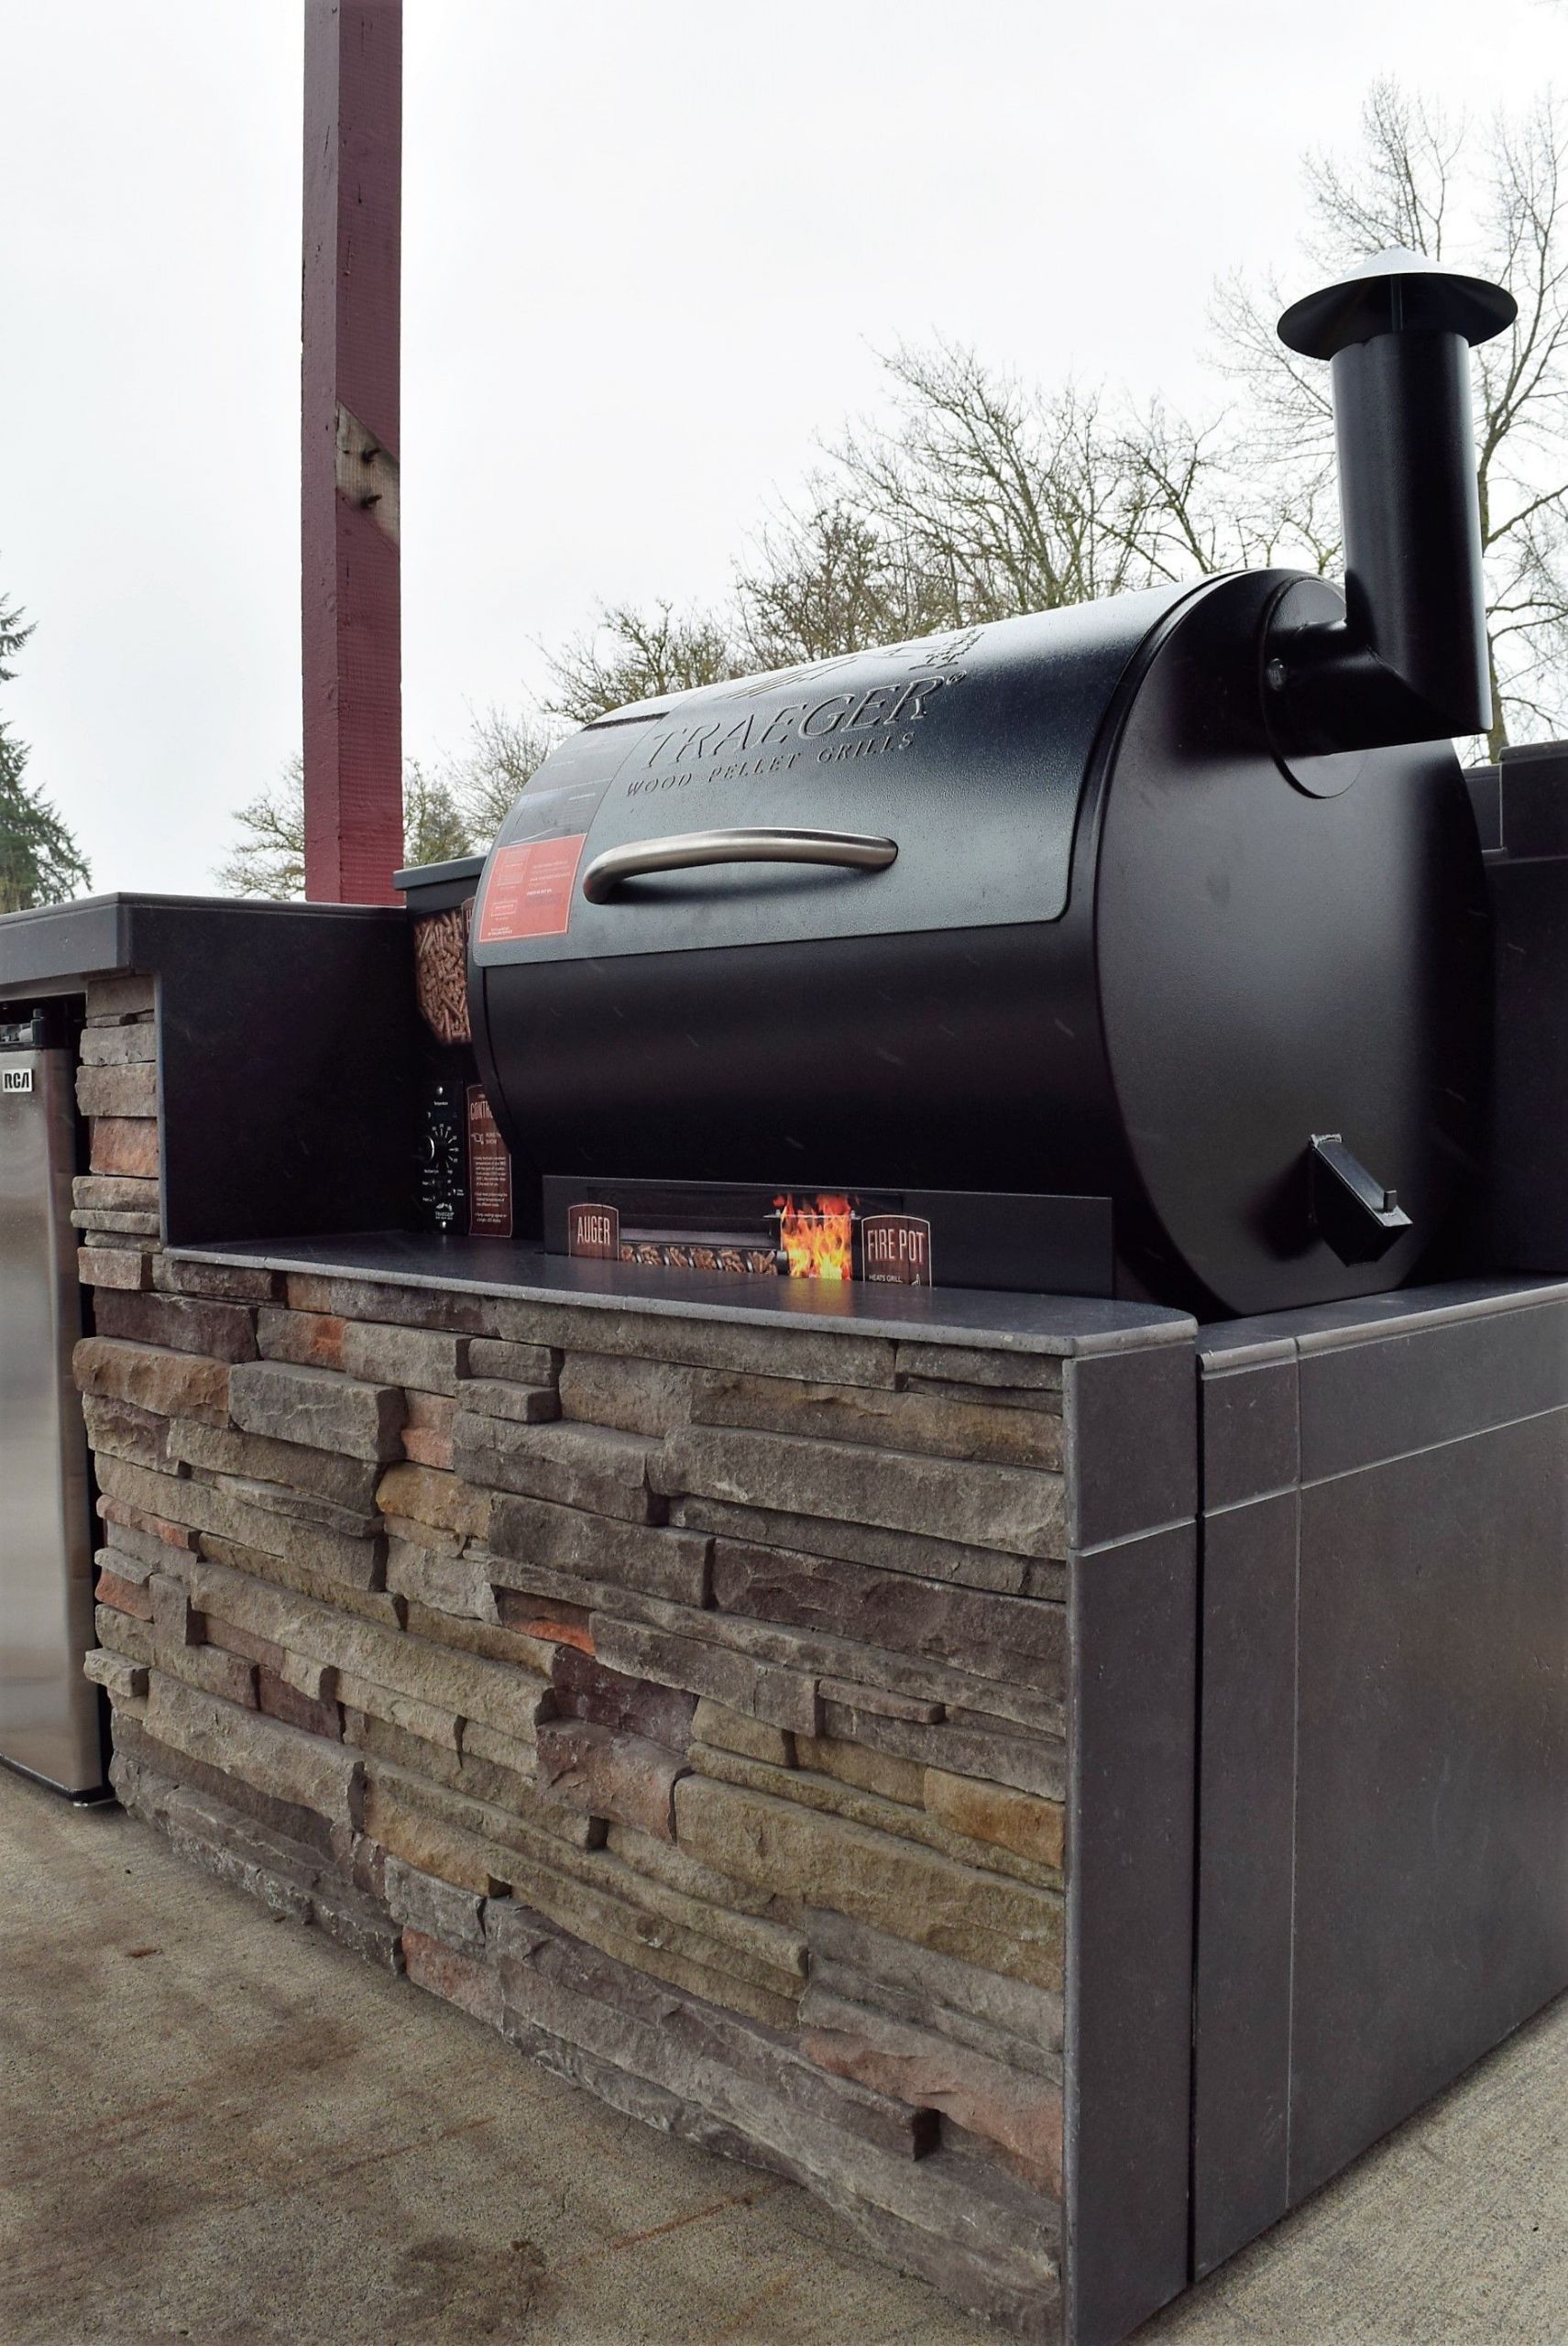 Traeger Outdoor Kitchen
 Outdoor Kitchen pellet grilling with a Traeger Custom